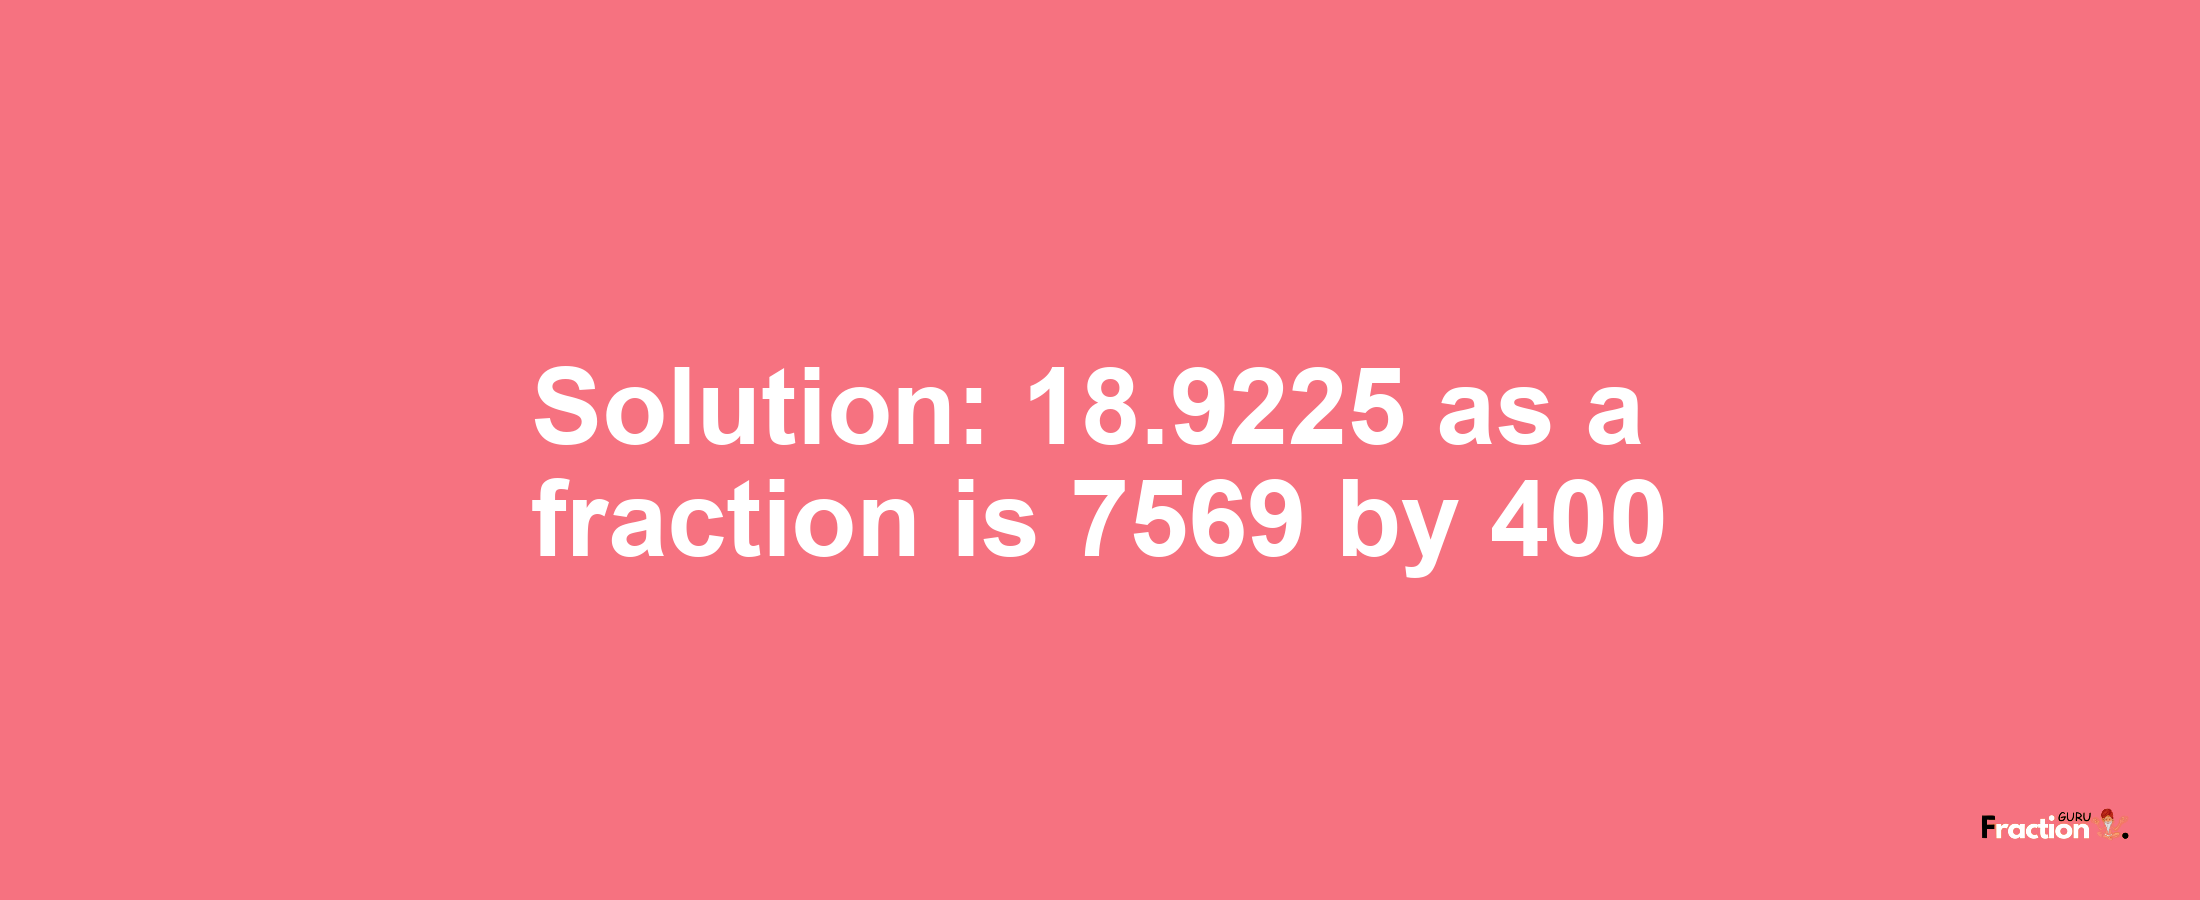 Solution:18.9225 as a fraction is 7569/400